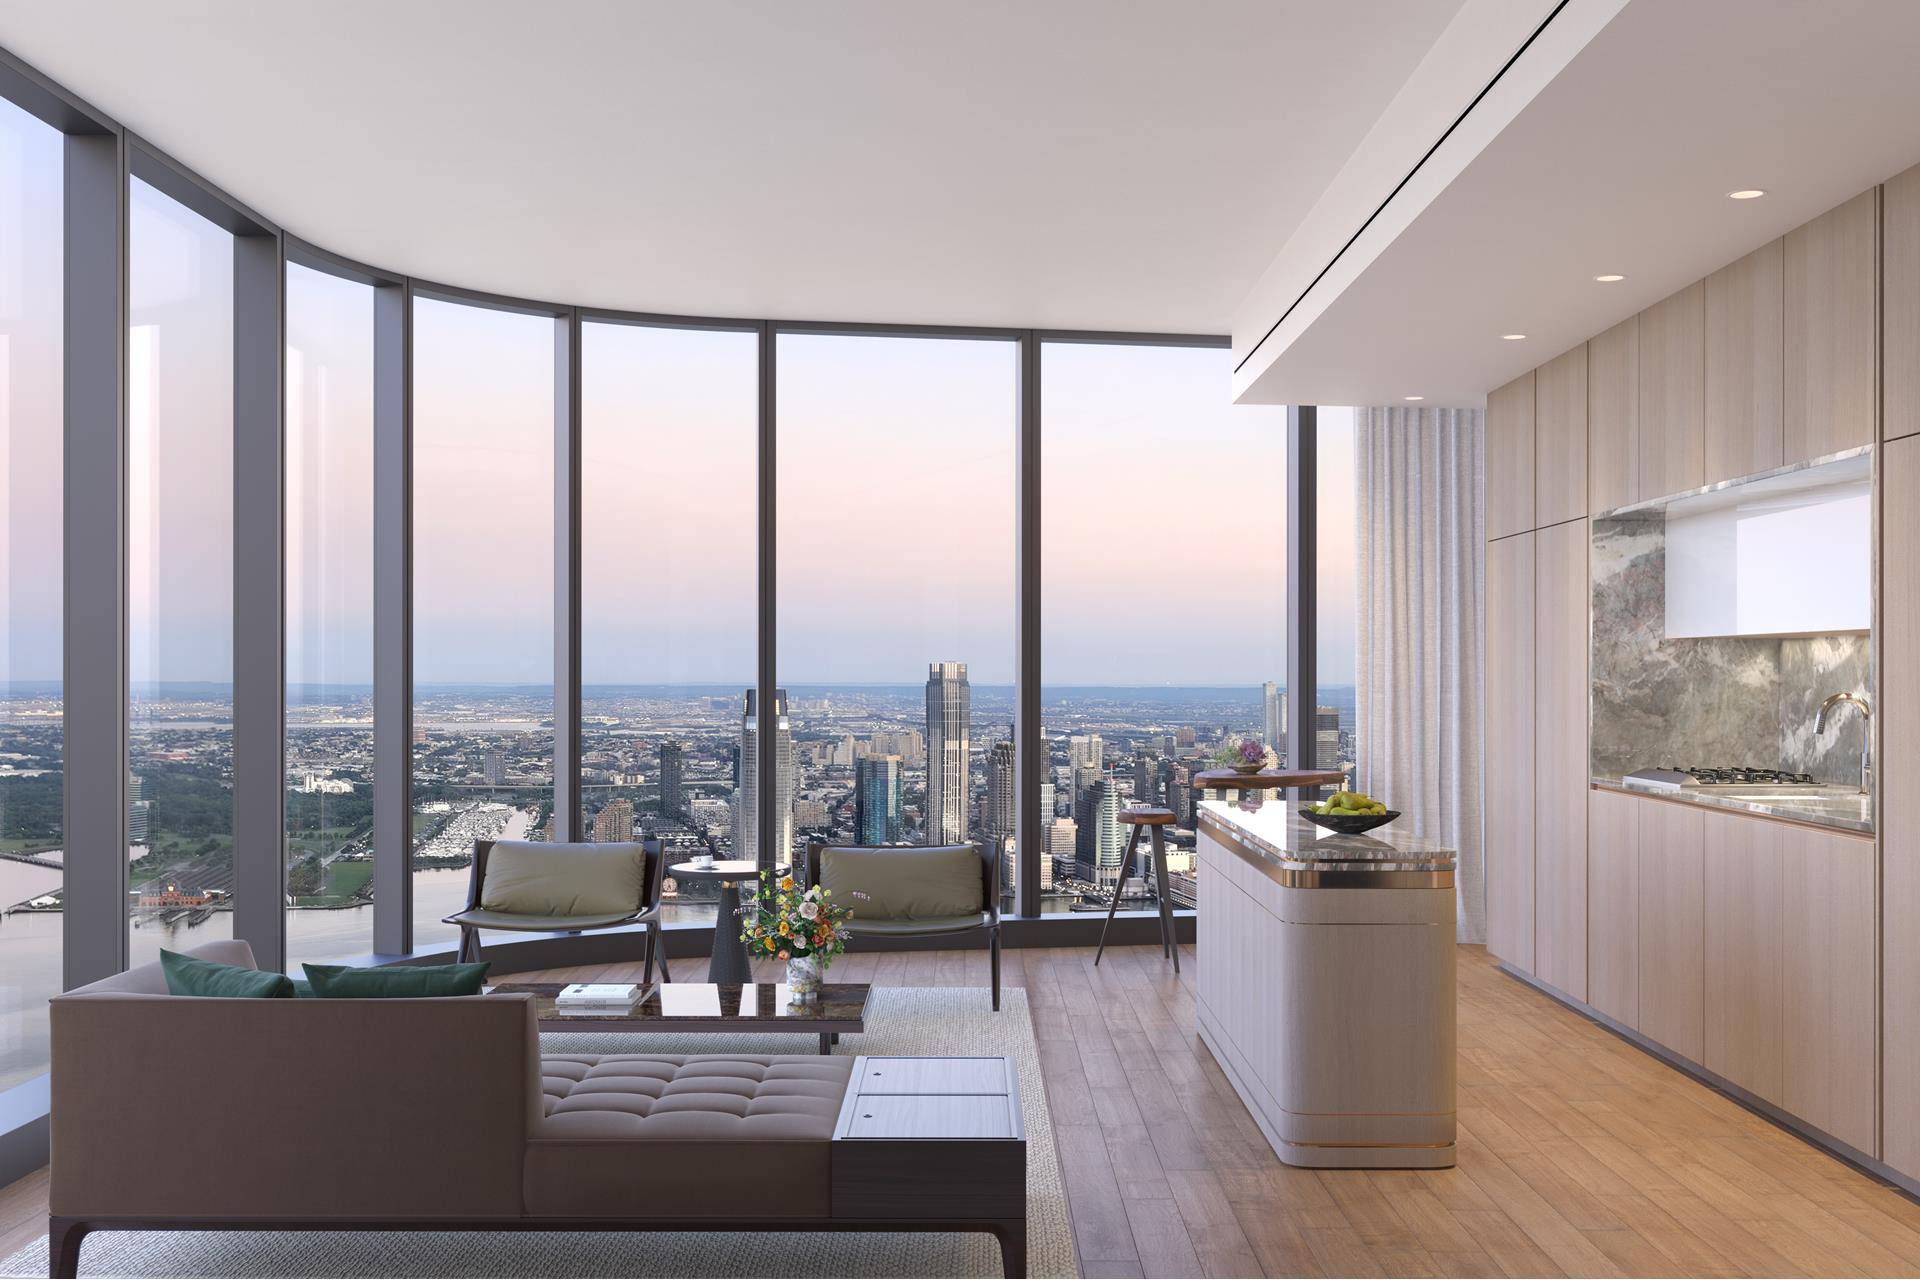 Introducing Residence 36C at The Greenwich by Rafael Vi oly, an inviting two bedroom, two and a half bathroom, showcasing southern and western exposures with panoramic views.